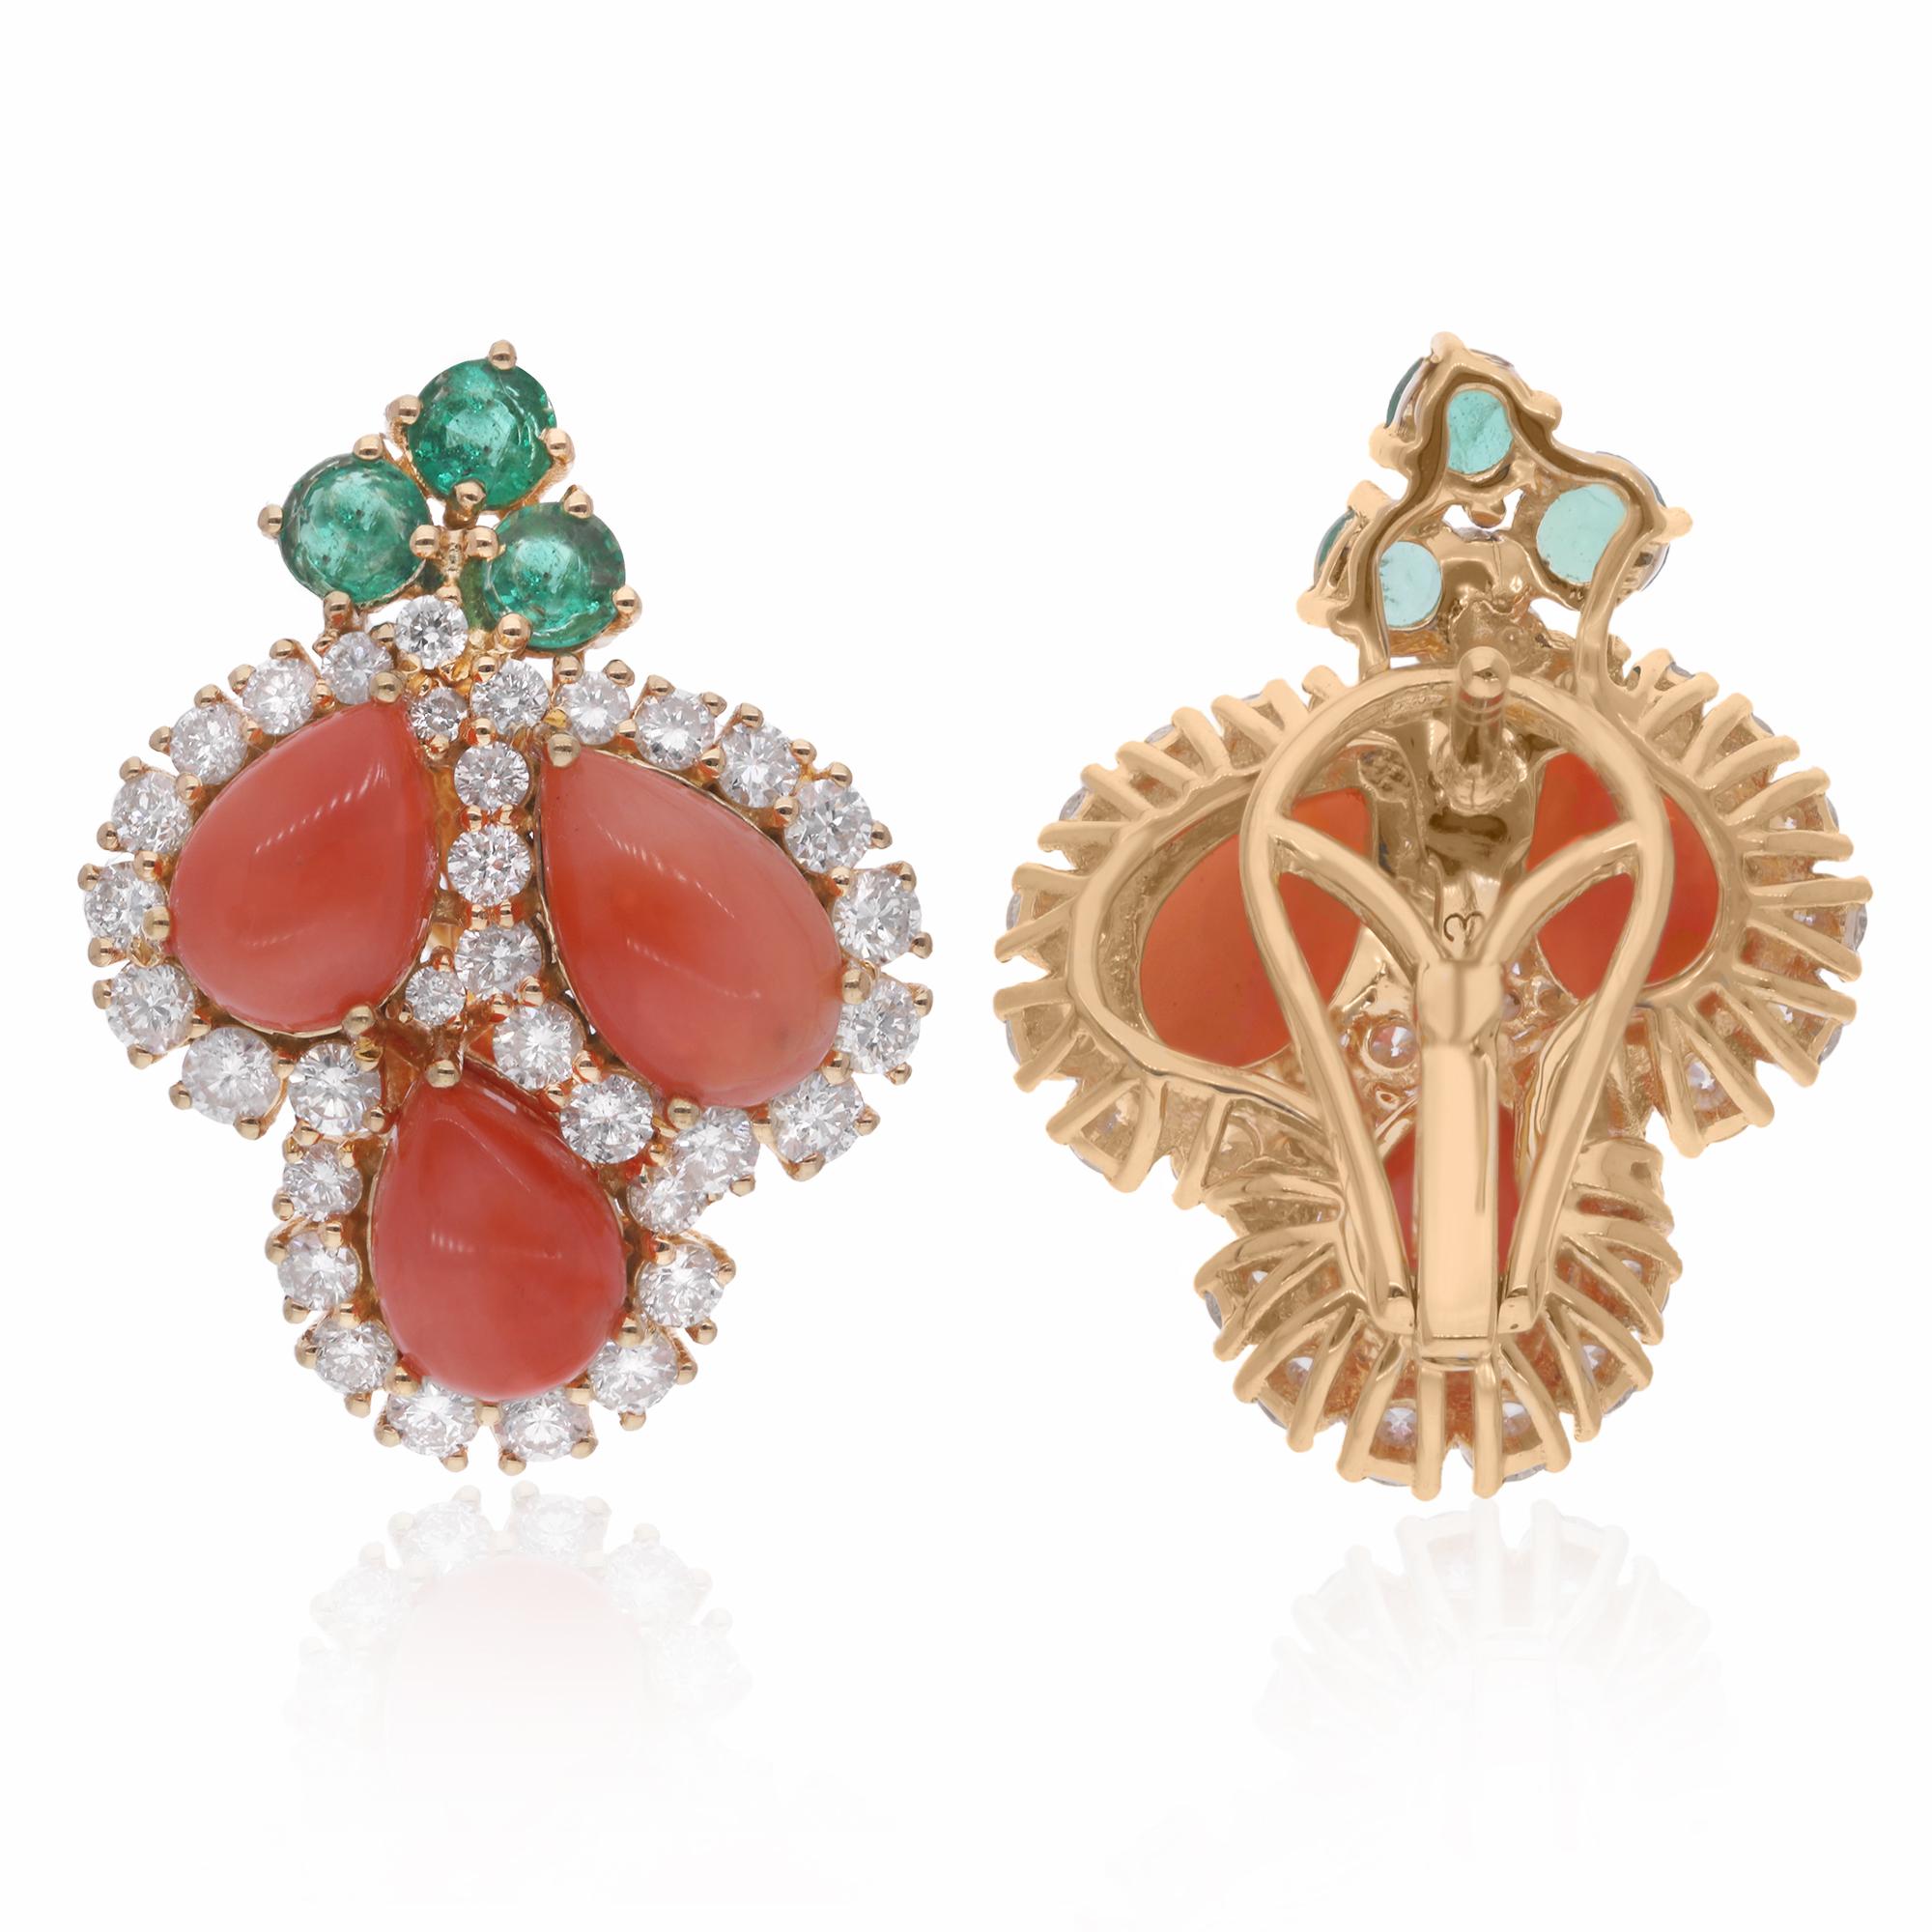 Experience the allure of the ocean and the magnificence of nature with these breathtaking Real Coral Emerald Gemstone Stud Earrings. Crafted with exquisite artistry and passion, these earrings are a true testament to the beauty of fine